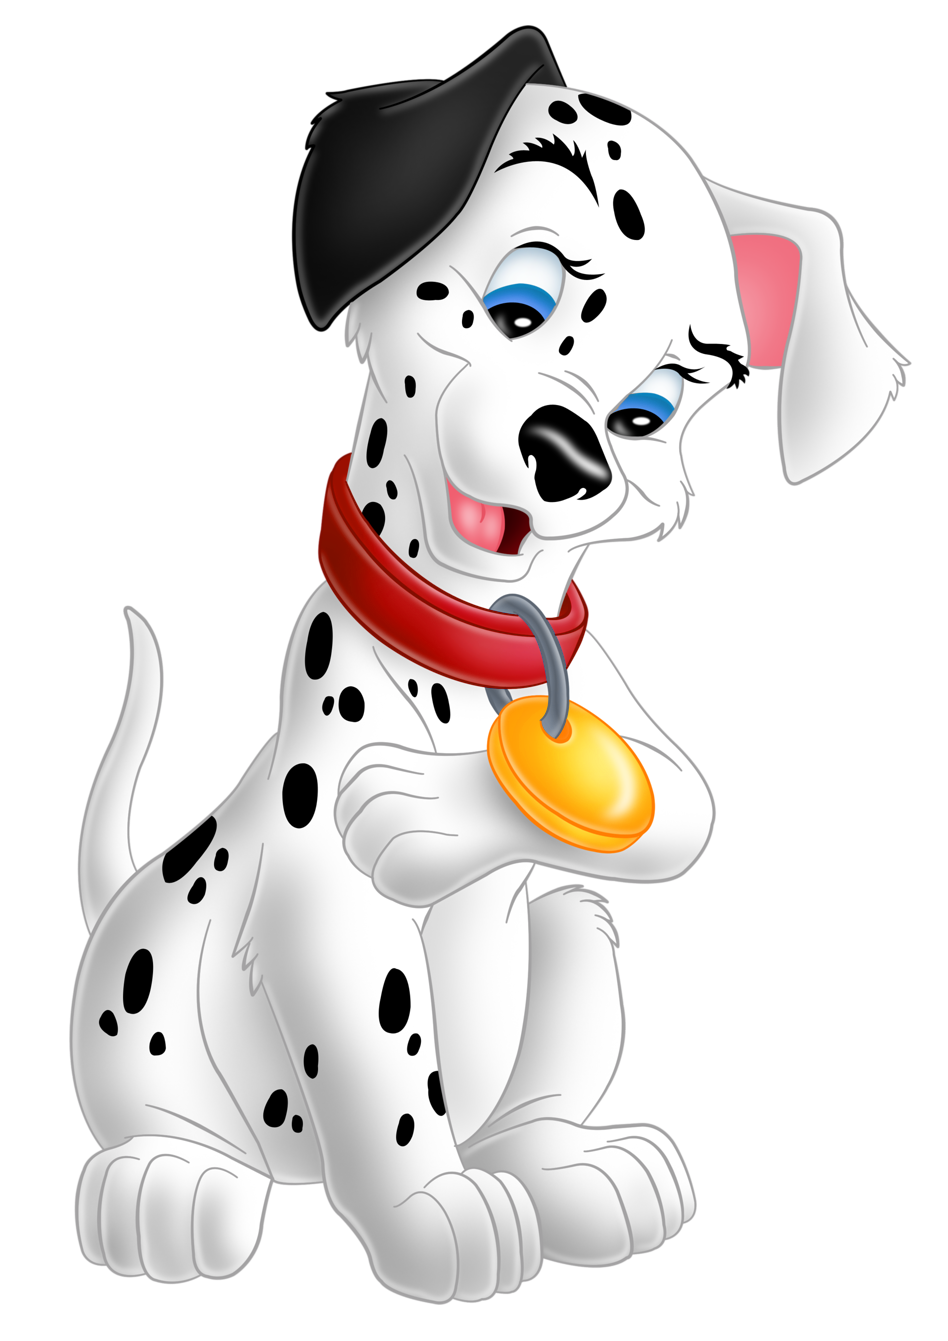 Clip Arts Related To : 101 Dalmatians Png. 